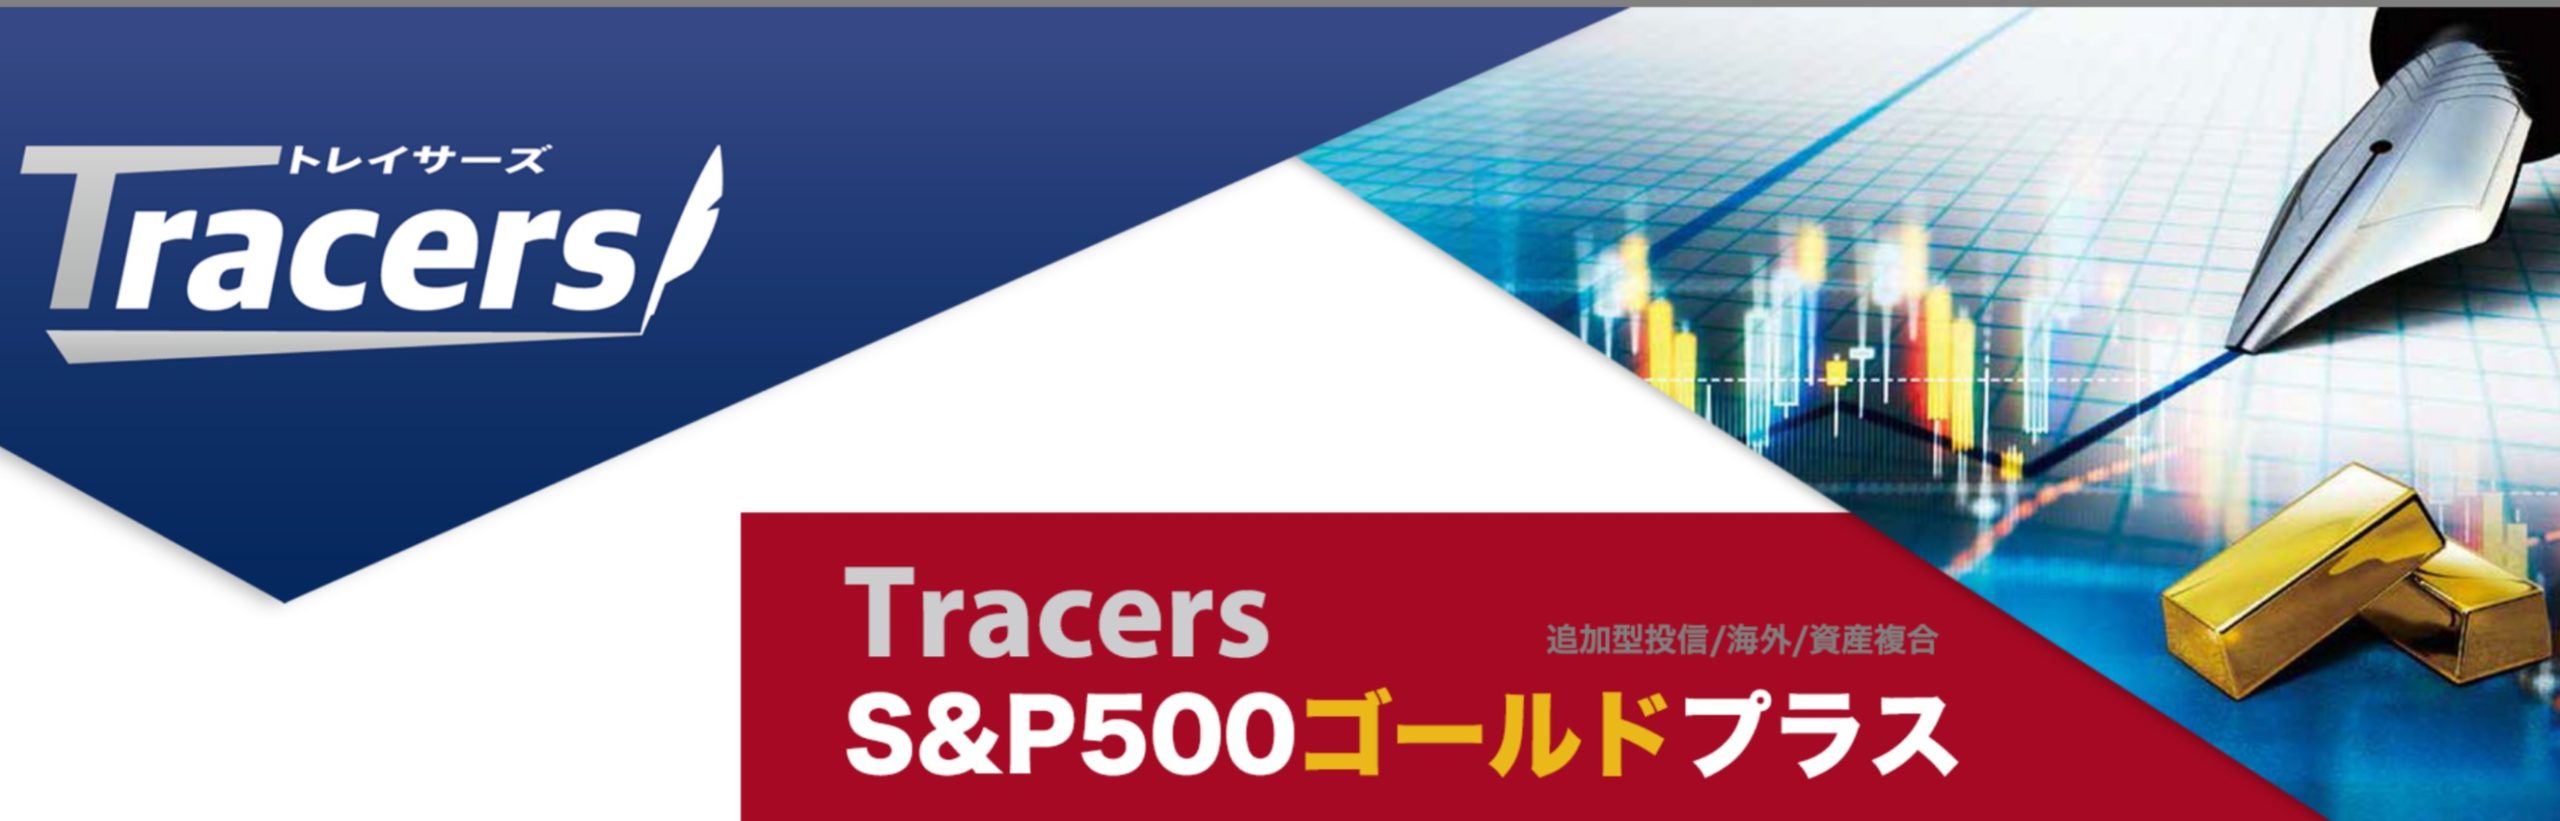 Tracers S&P500ゴールドプラス